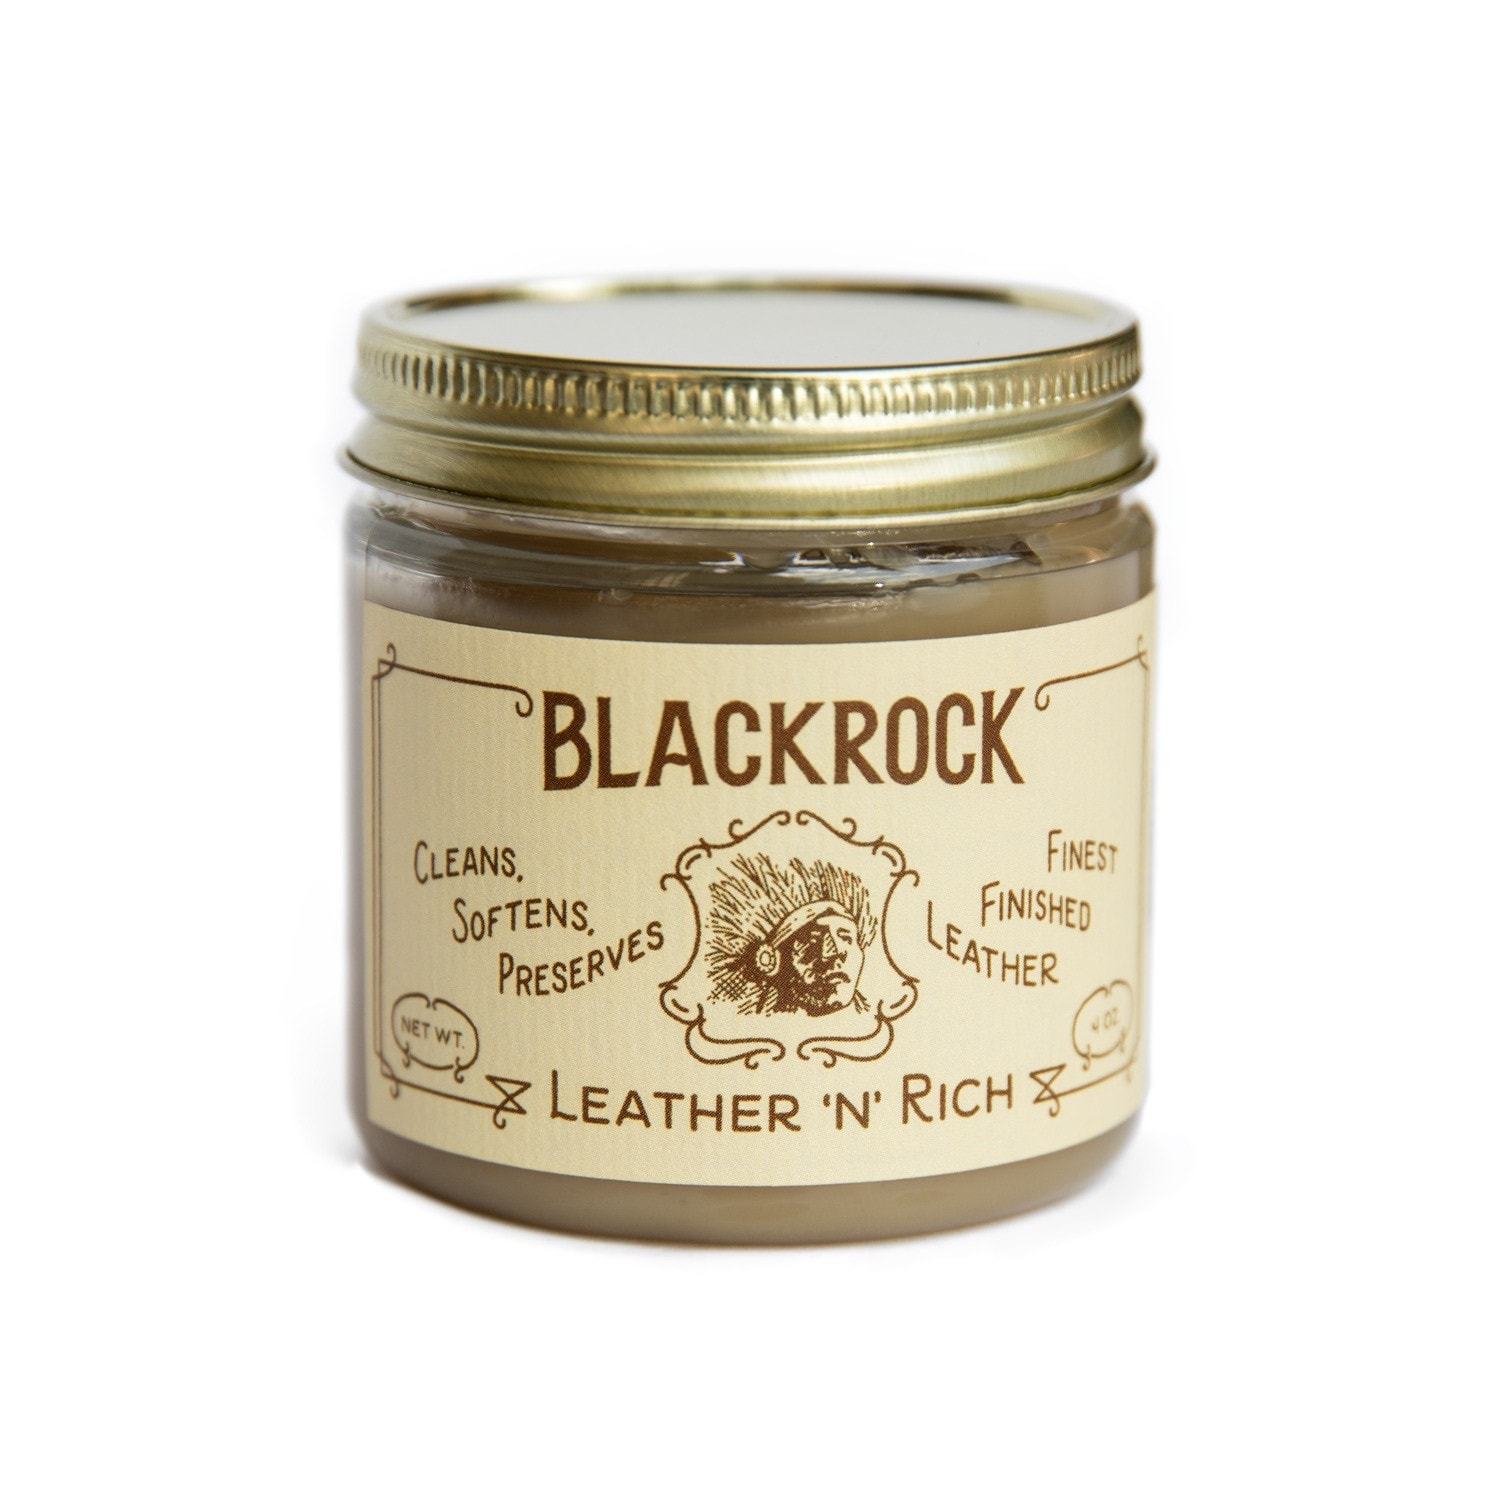 HELM Boots Boot Care Blackrock Leather 'n Rich